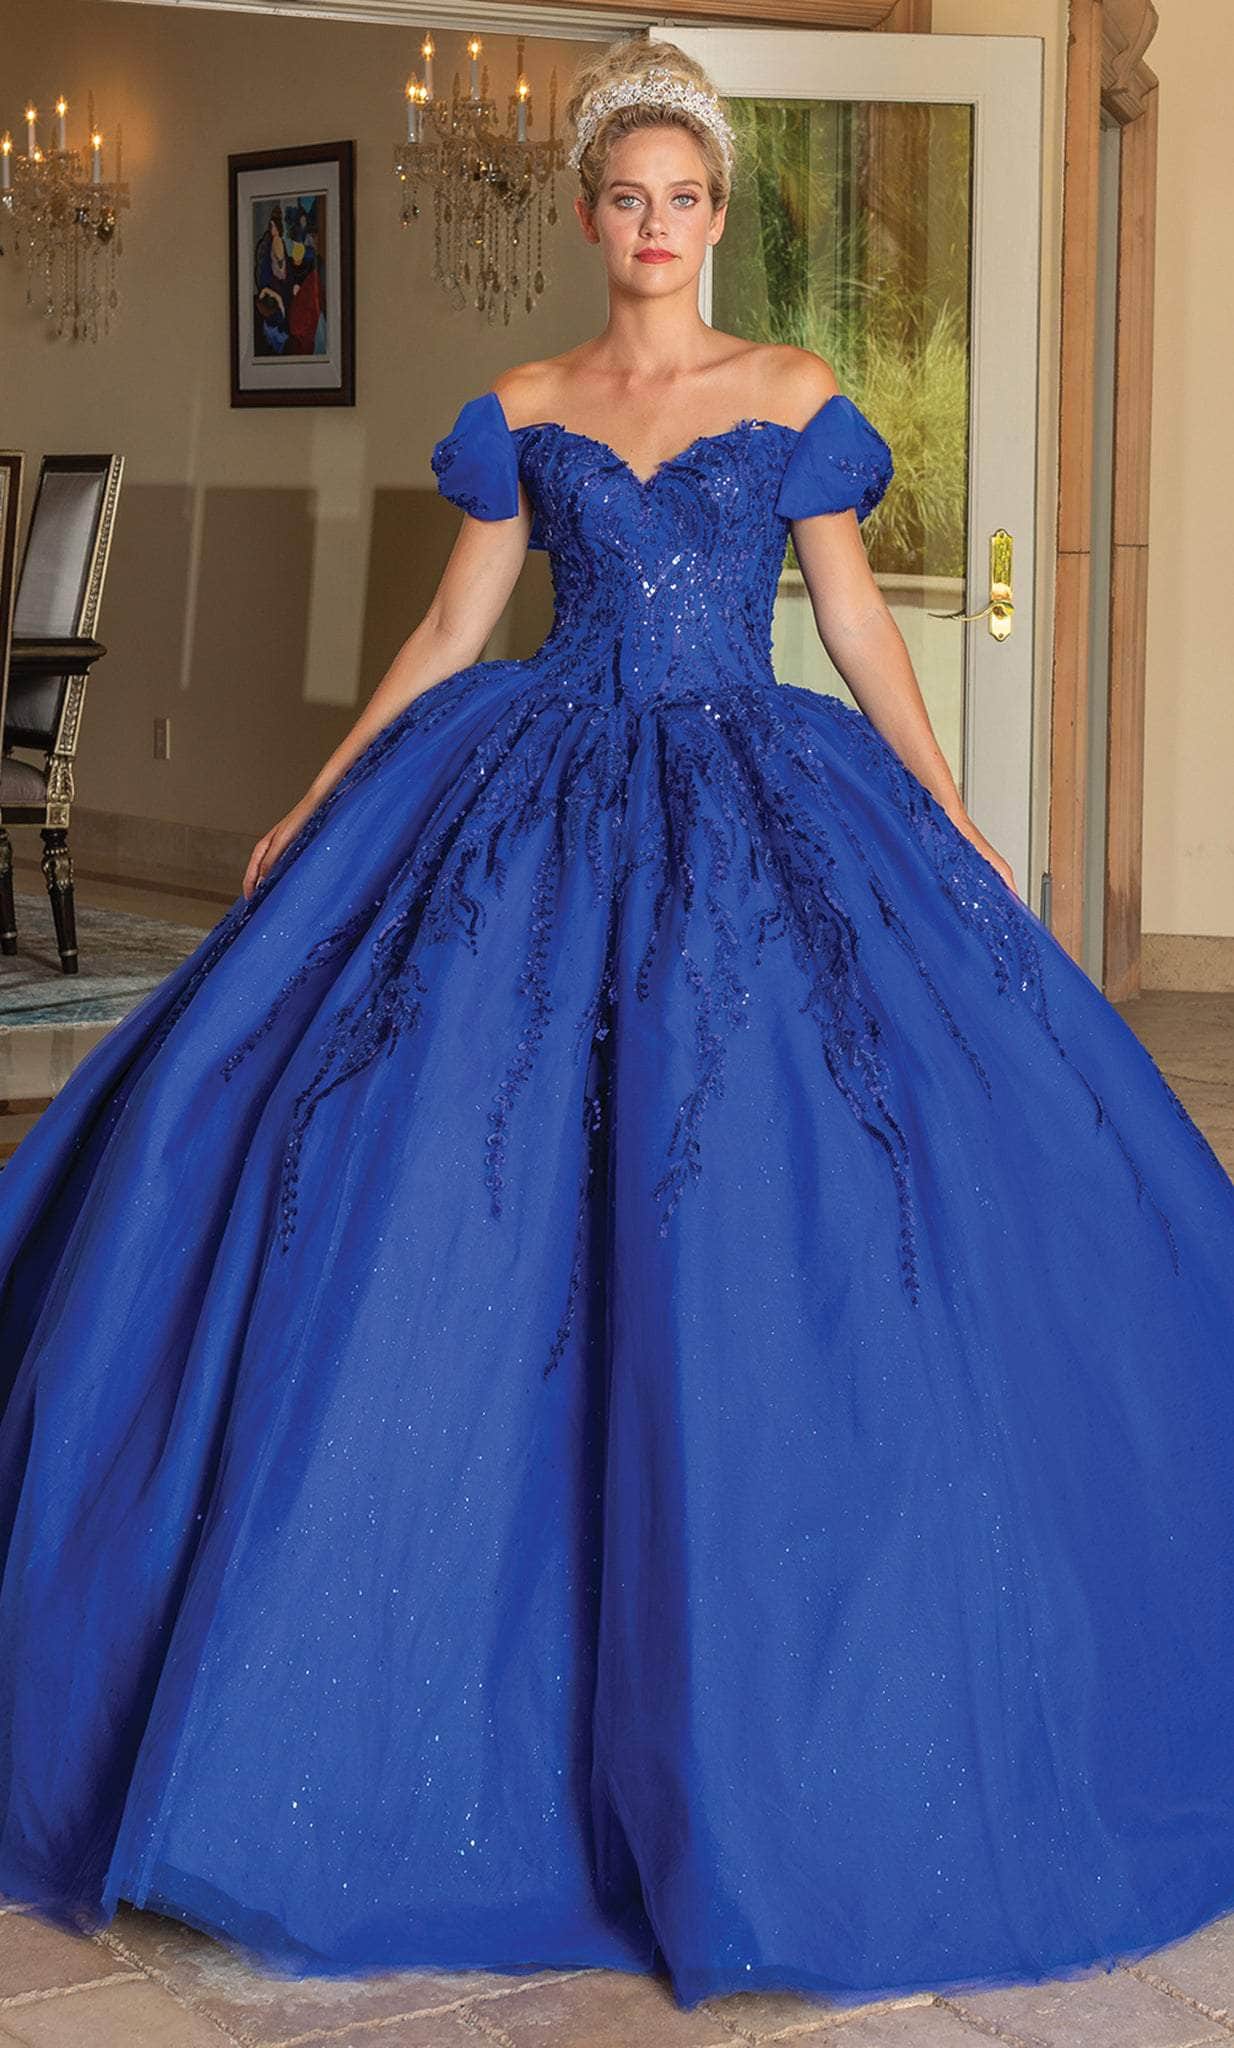 Dancing Queen 1780 - Bow Accented Off Shoulder Ballgown
